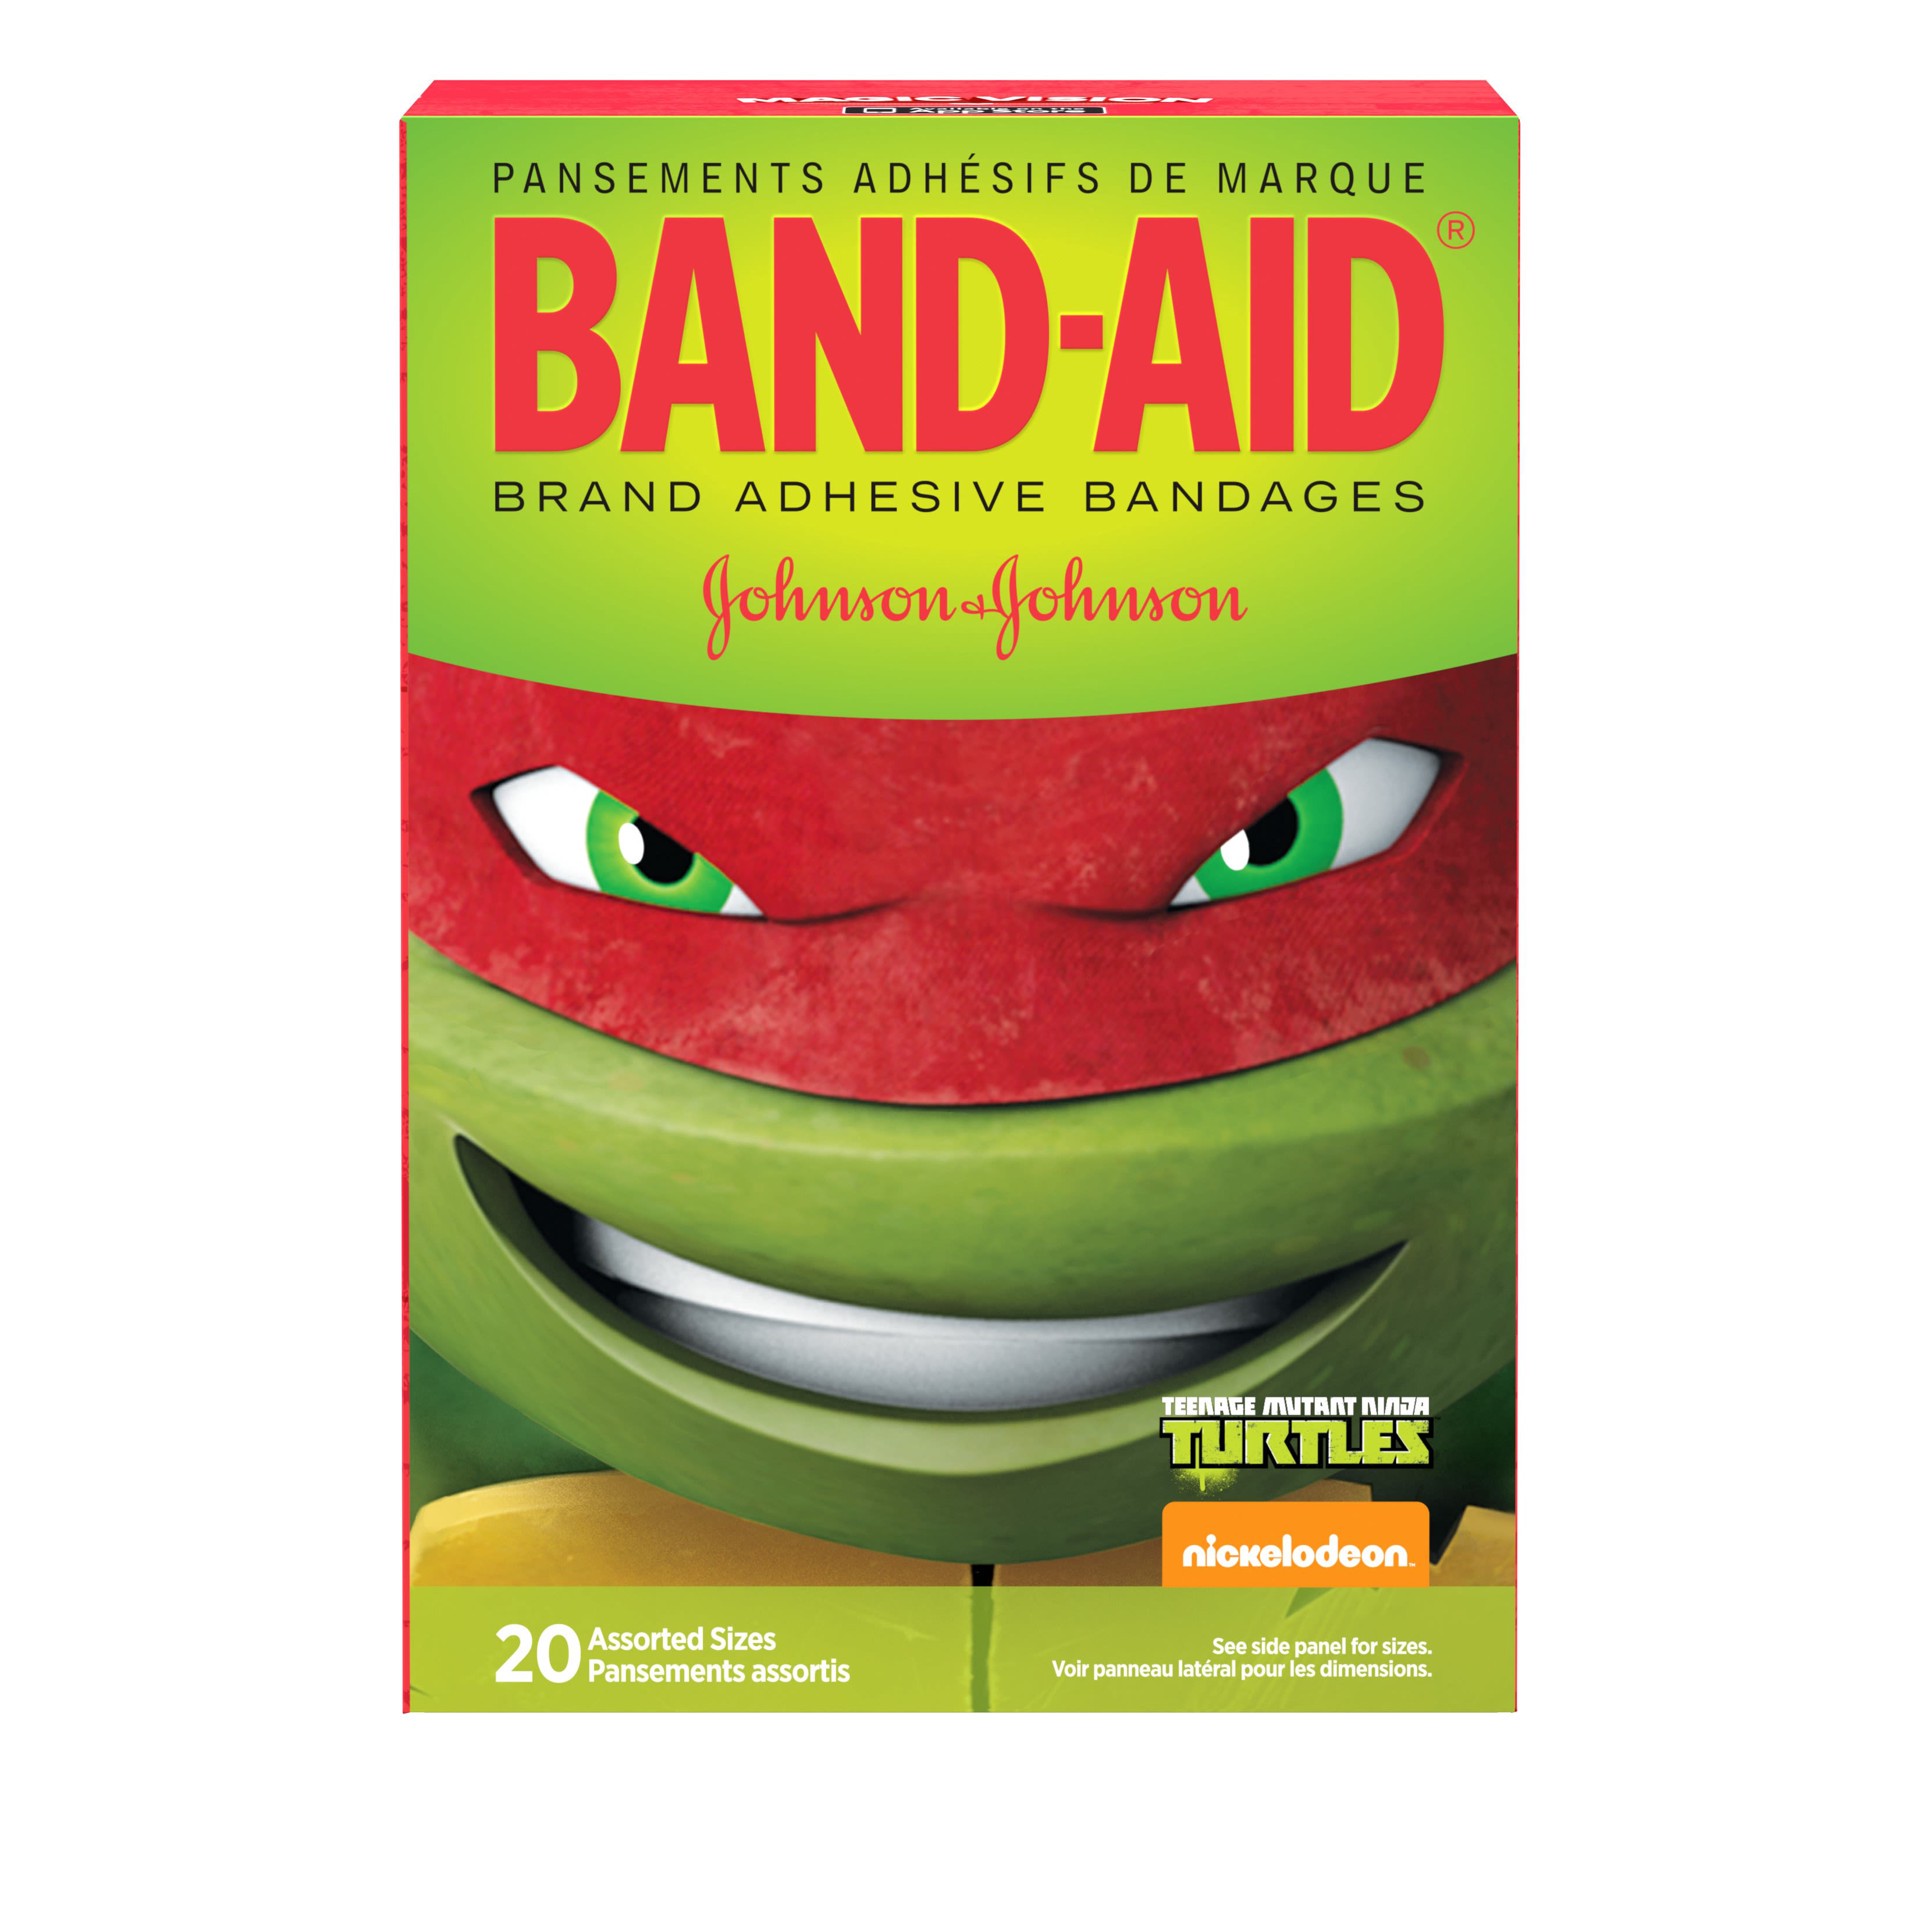 slide 1 of 5, BAND-AID Brand Adhesive Bandages featuring Nickelodeon Teenage Mutant Ninja Turtles™, Assorted Sizes, 20 Count, 20 ct